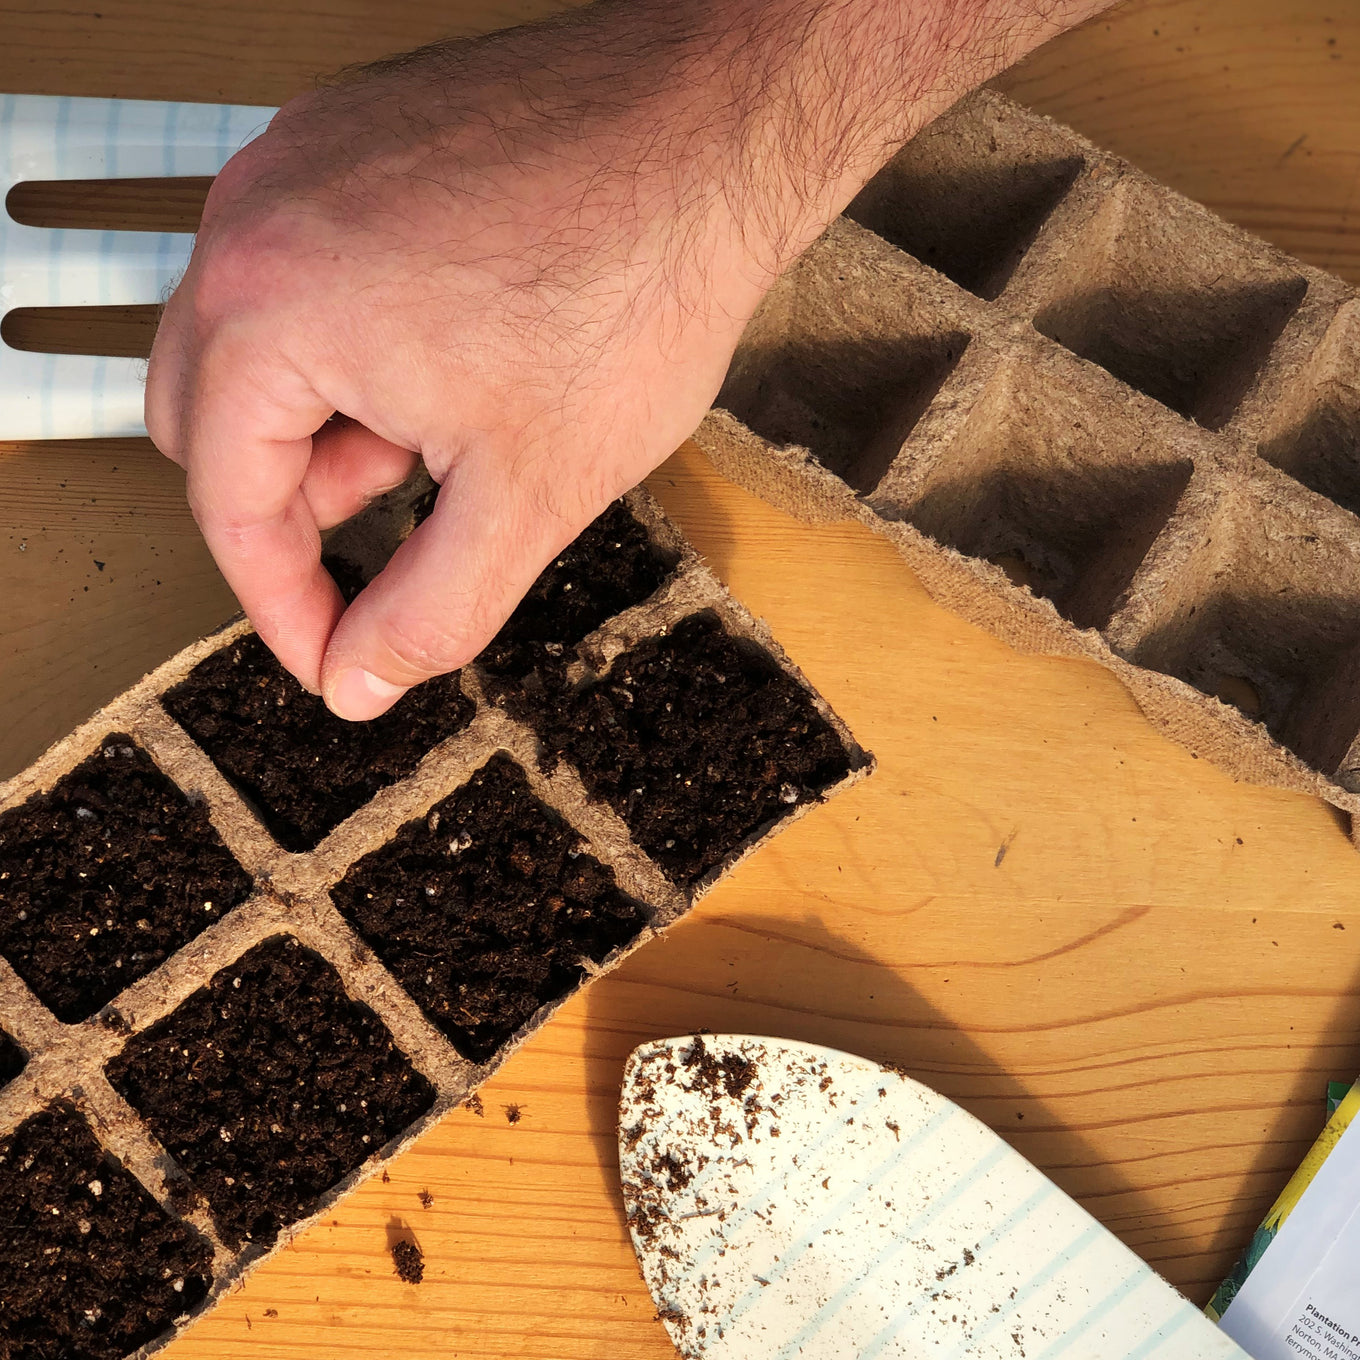 Start your Long Slim Organic Cayenne Pepper seeds in biodegradable peat strips with sowing mix.